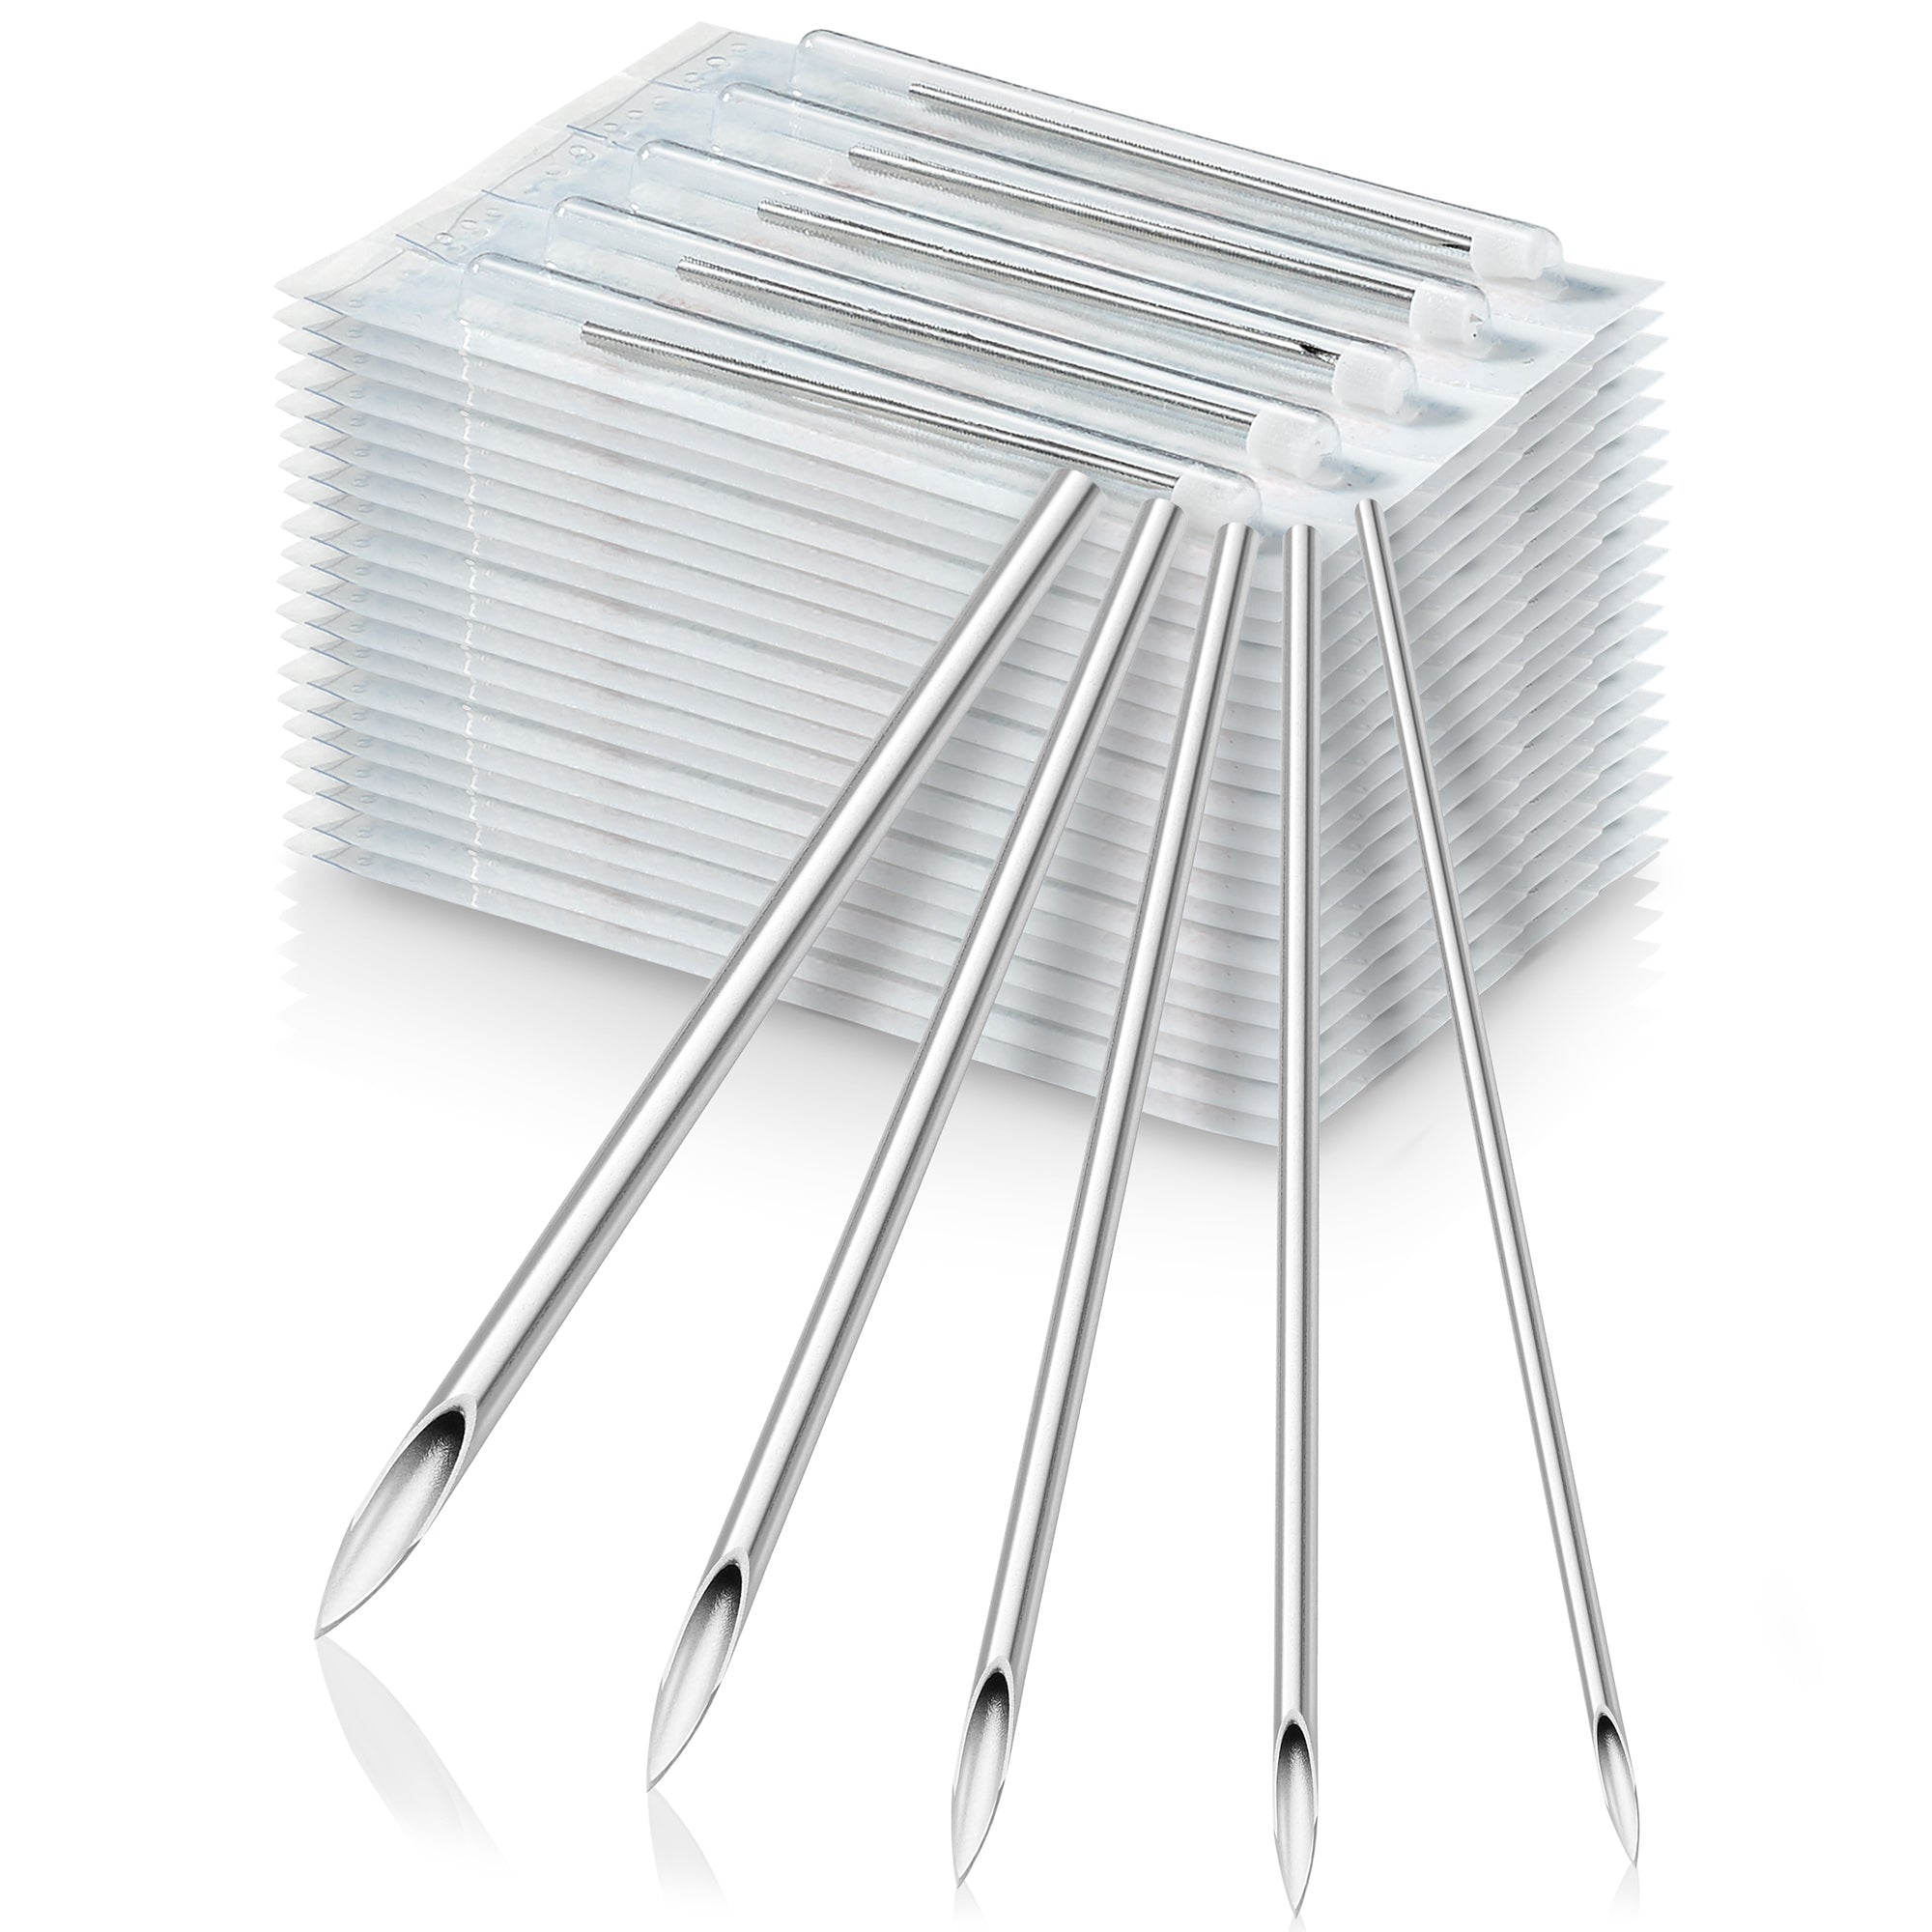 100-Pack, Piercing Needles for 12g, 14g, 16g, 18g and 20g (20 pcs